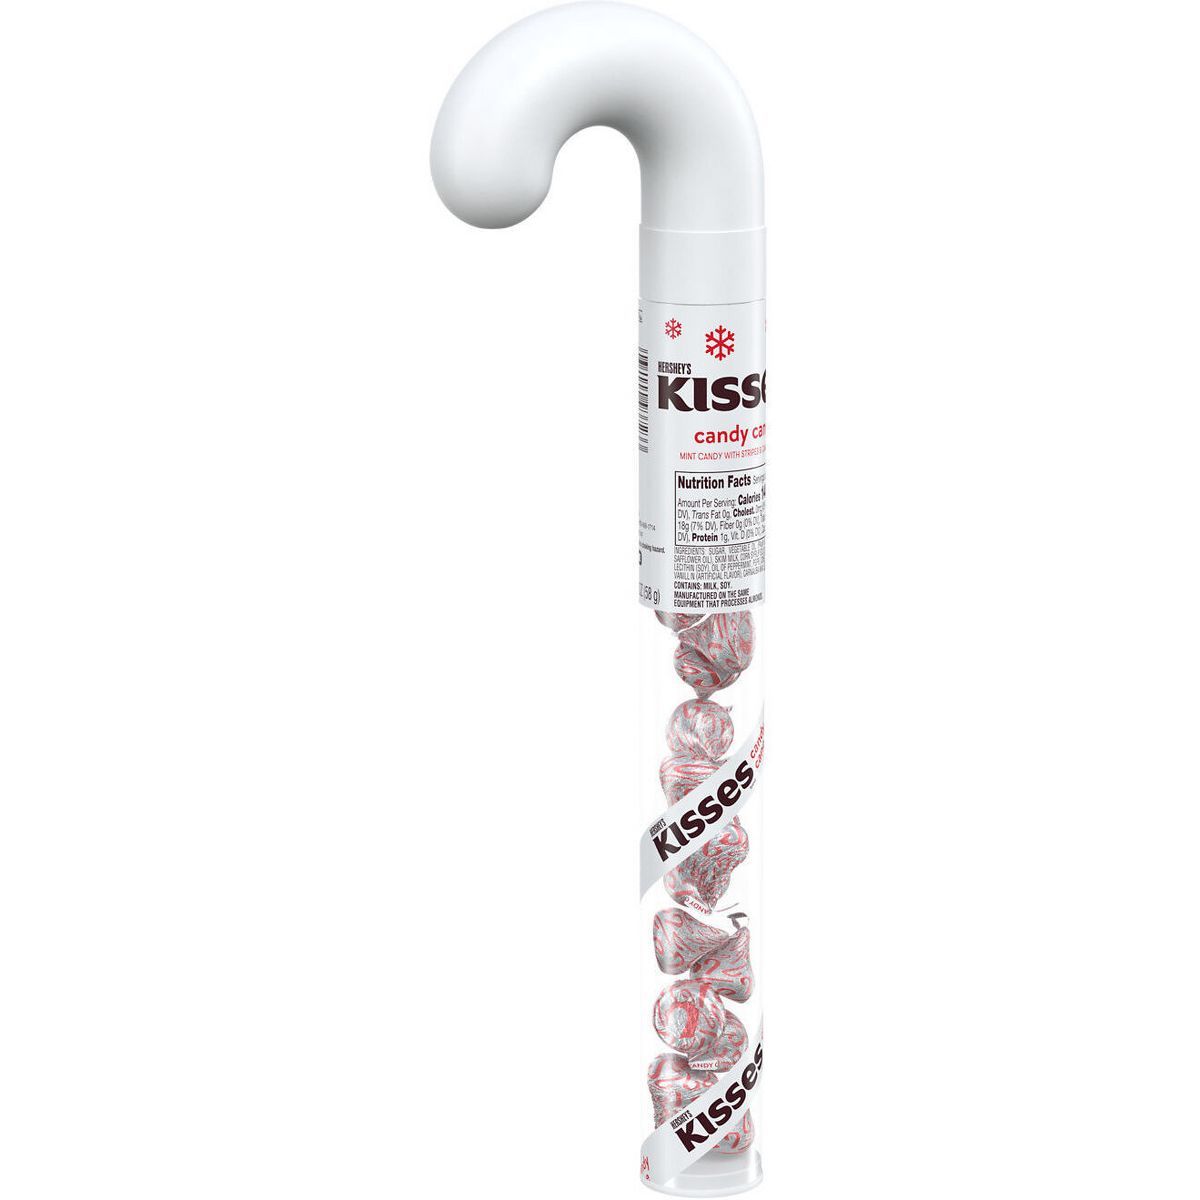 Hershey's Kisses Candy Cane Flavored Filled Cane Holiday Candy - 2.72oz | Target